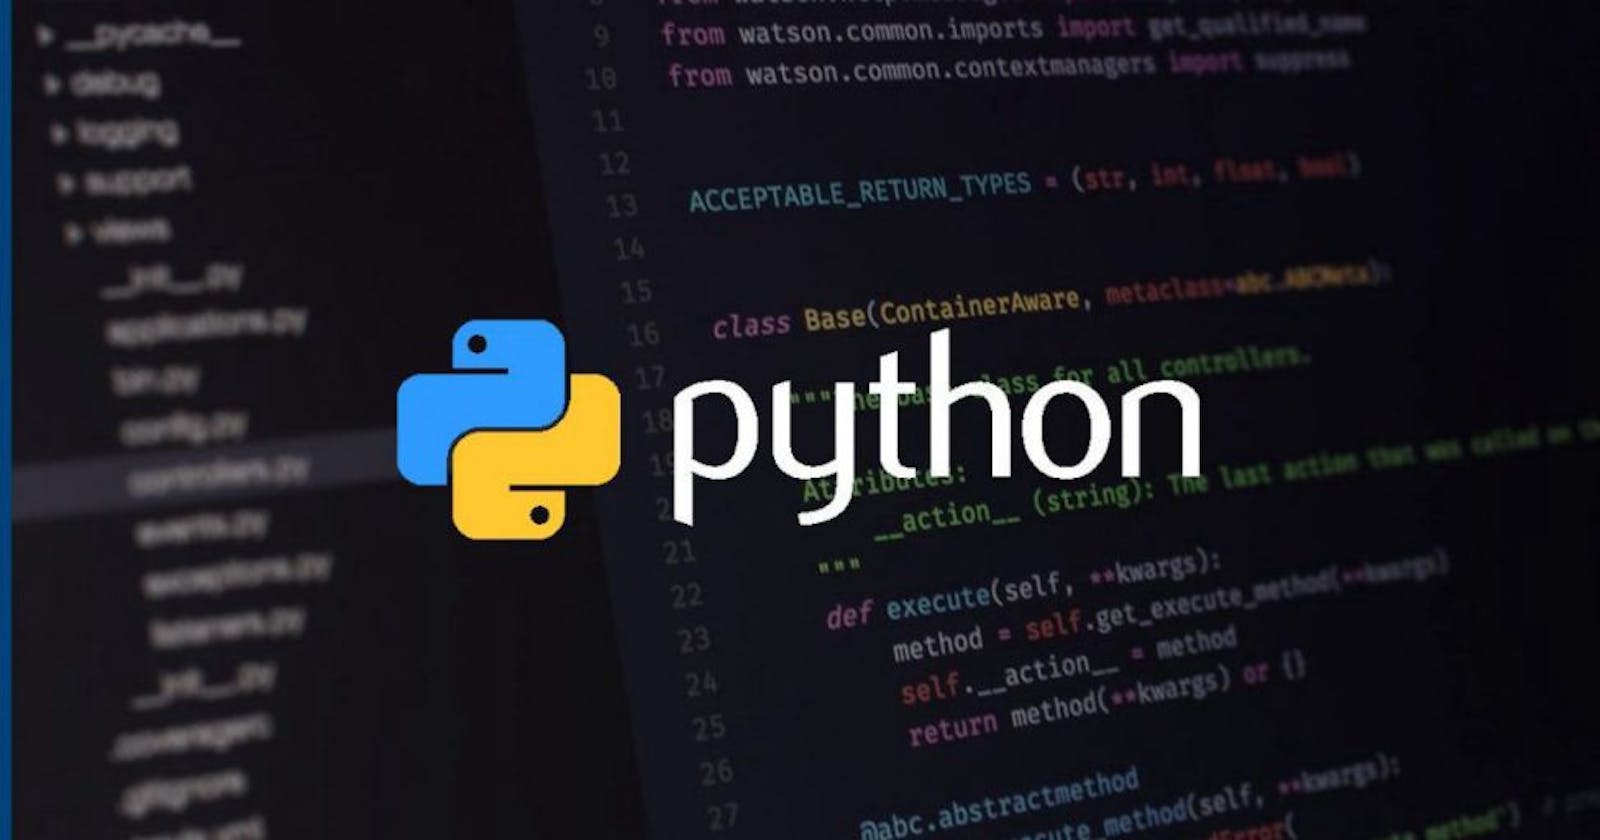 Why Python is Good for Data Science and Application Development